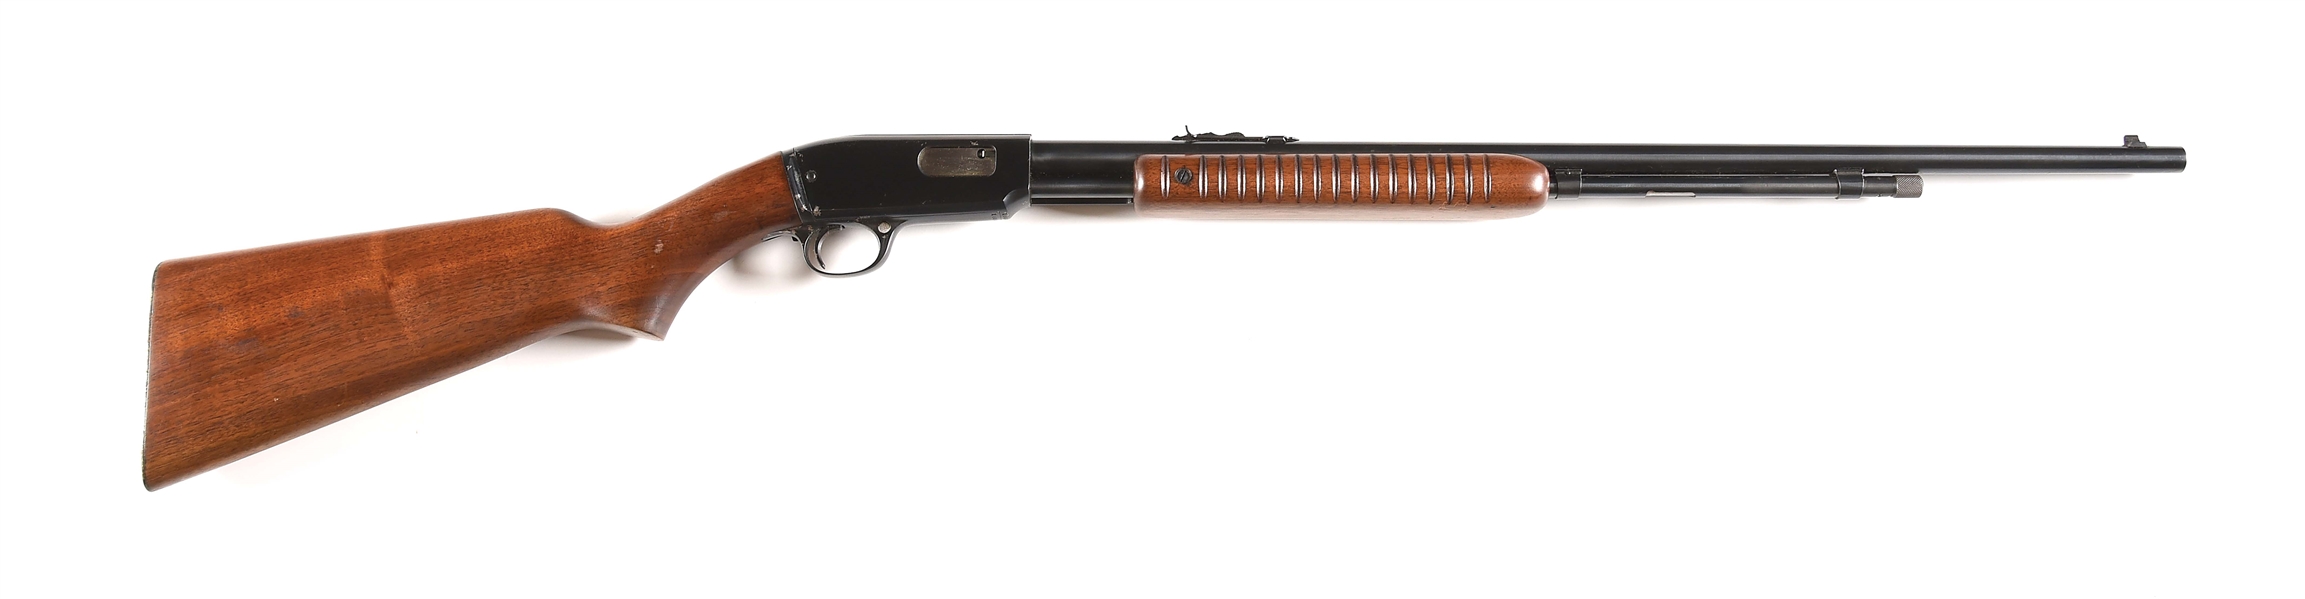 (C) WINCHESTER 61 PUMP ACTION RIFLE.